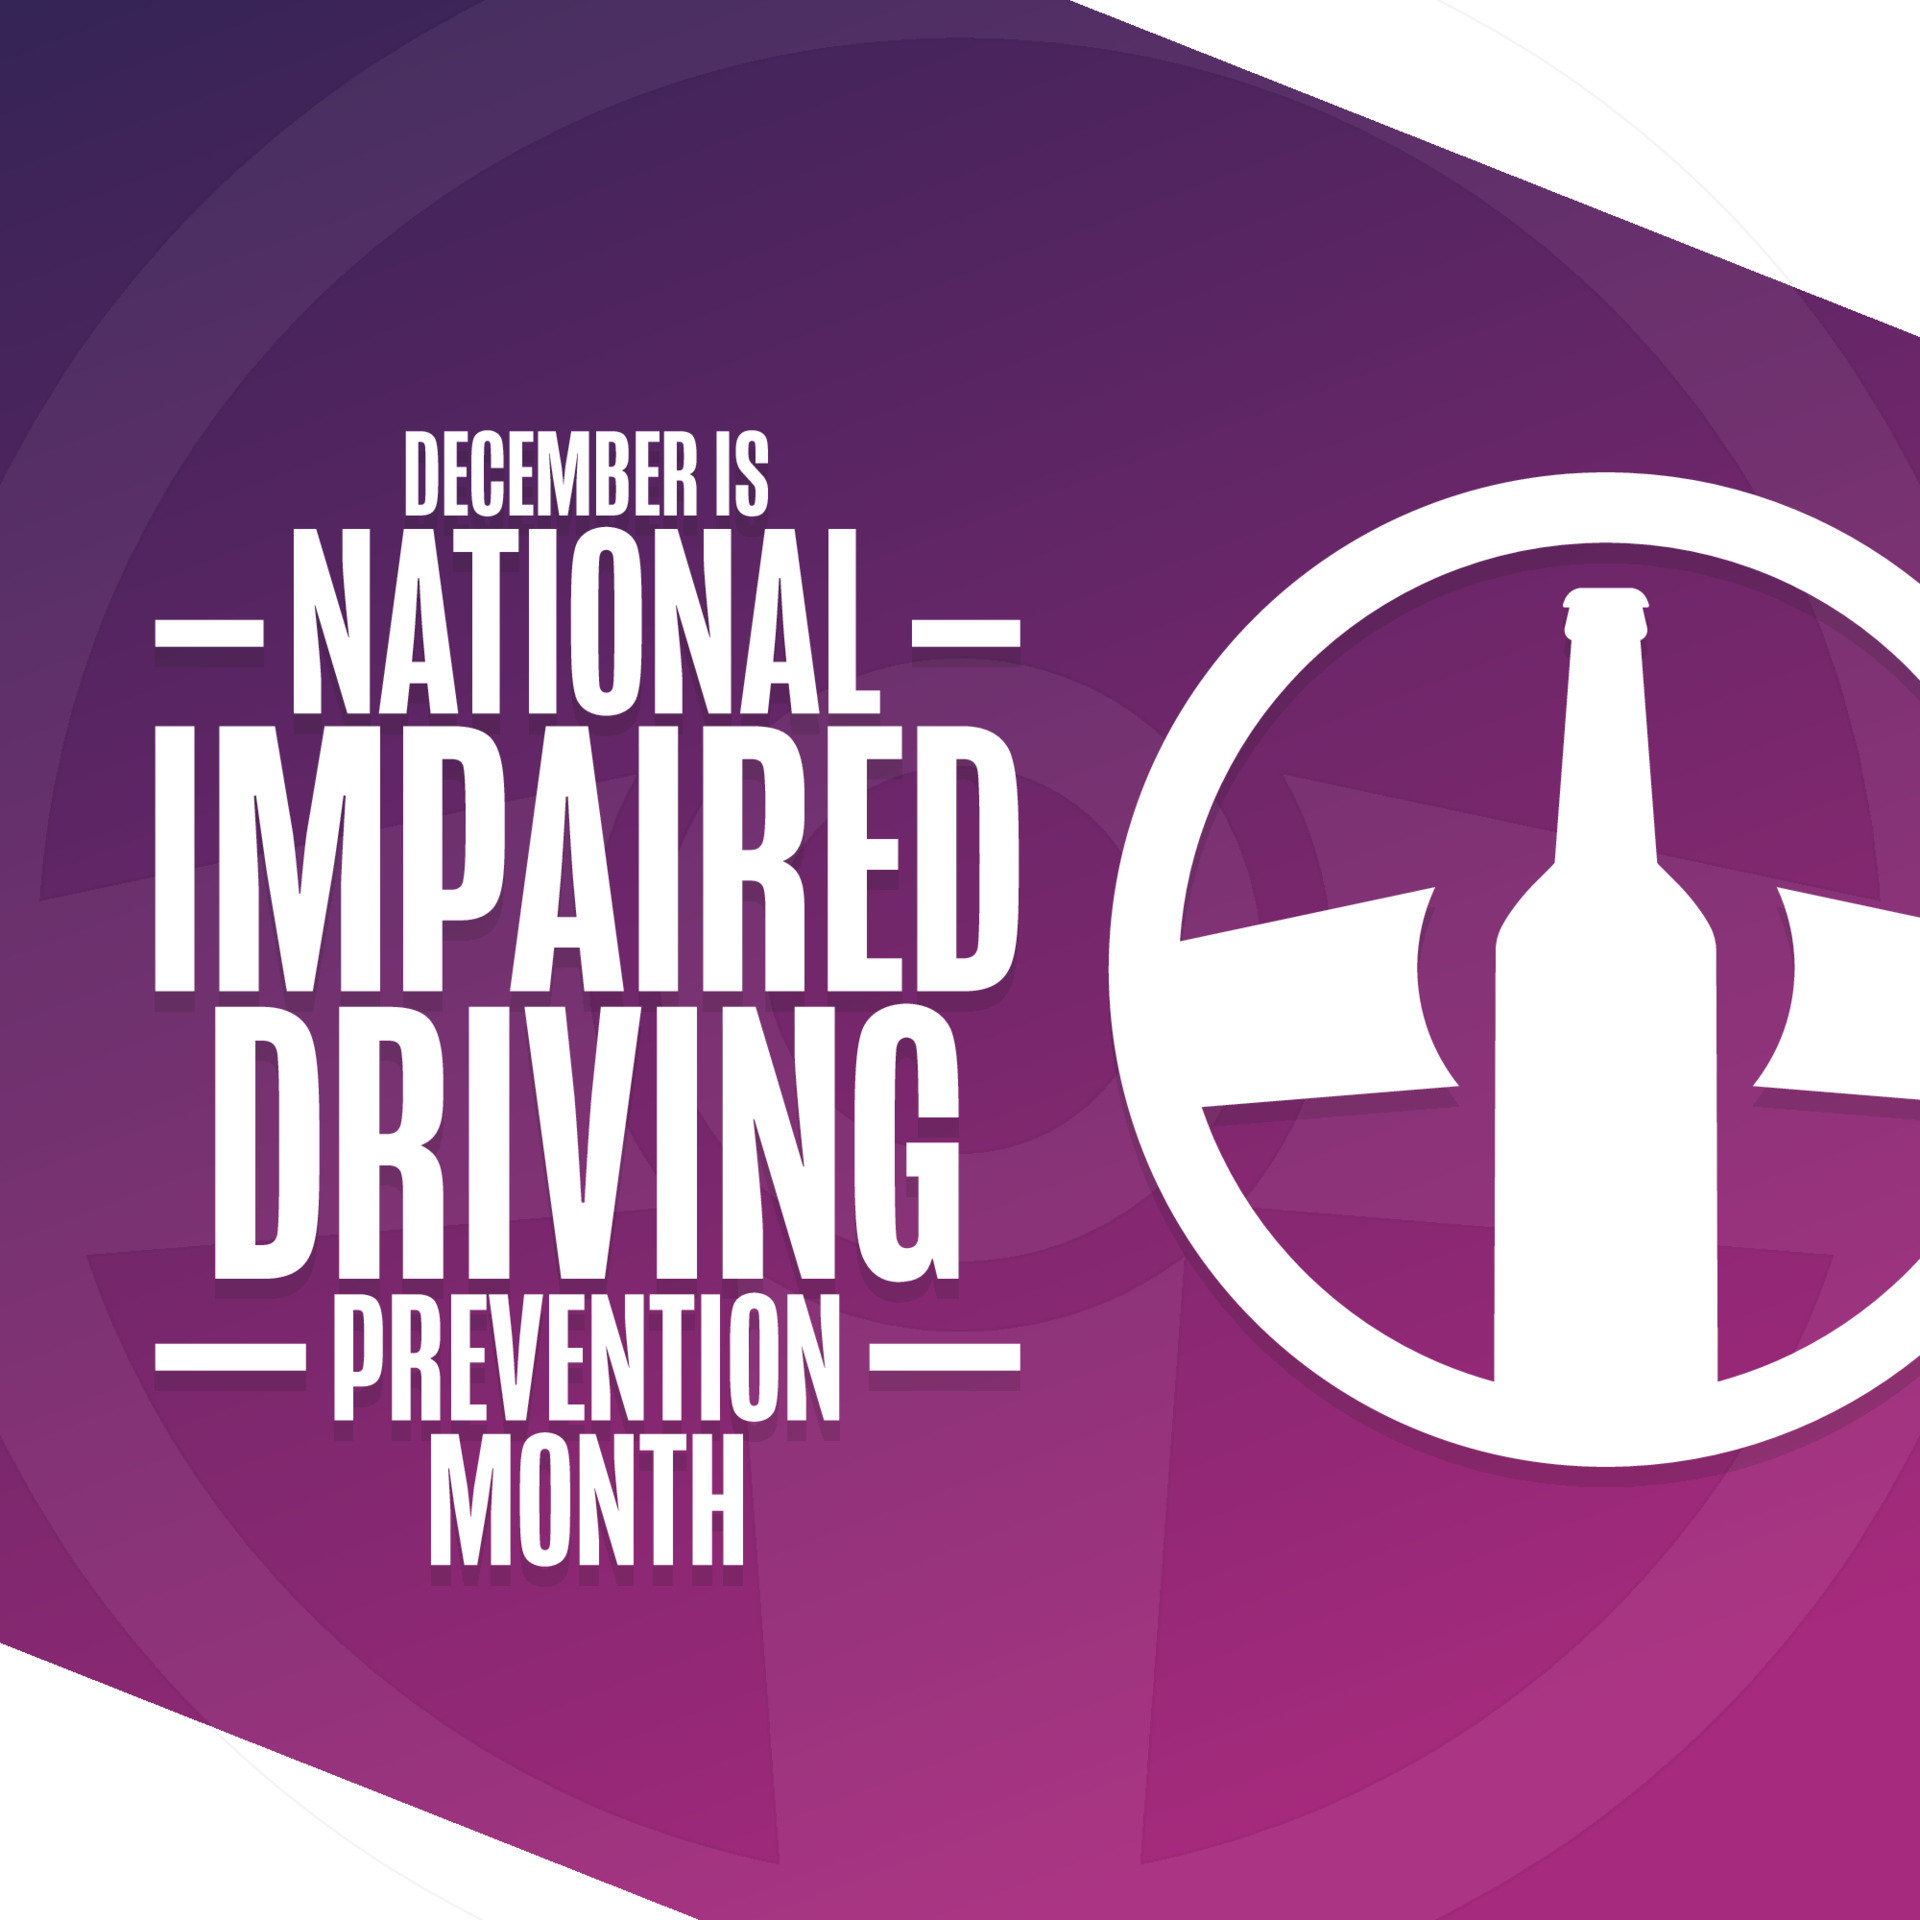 December is National Impaired Driving Prevention Month. Holiday concept